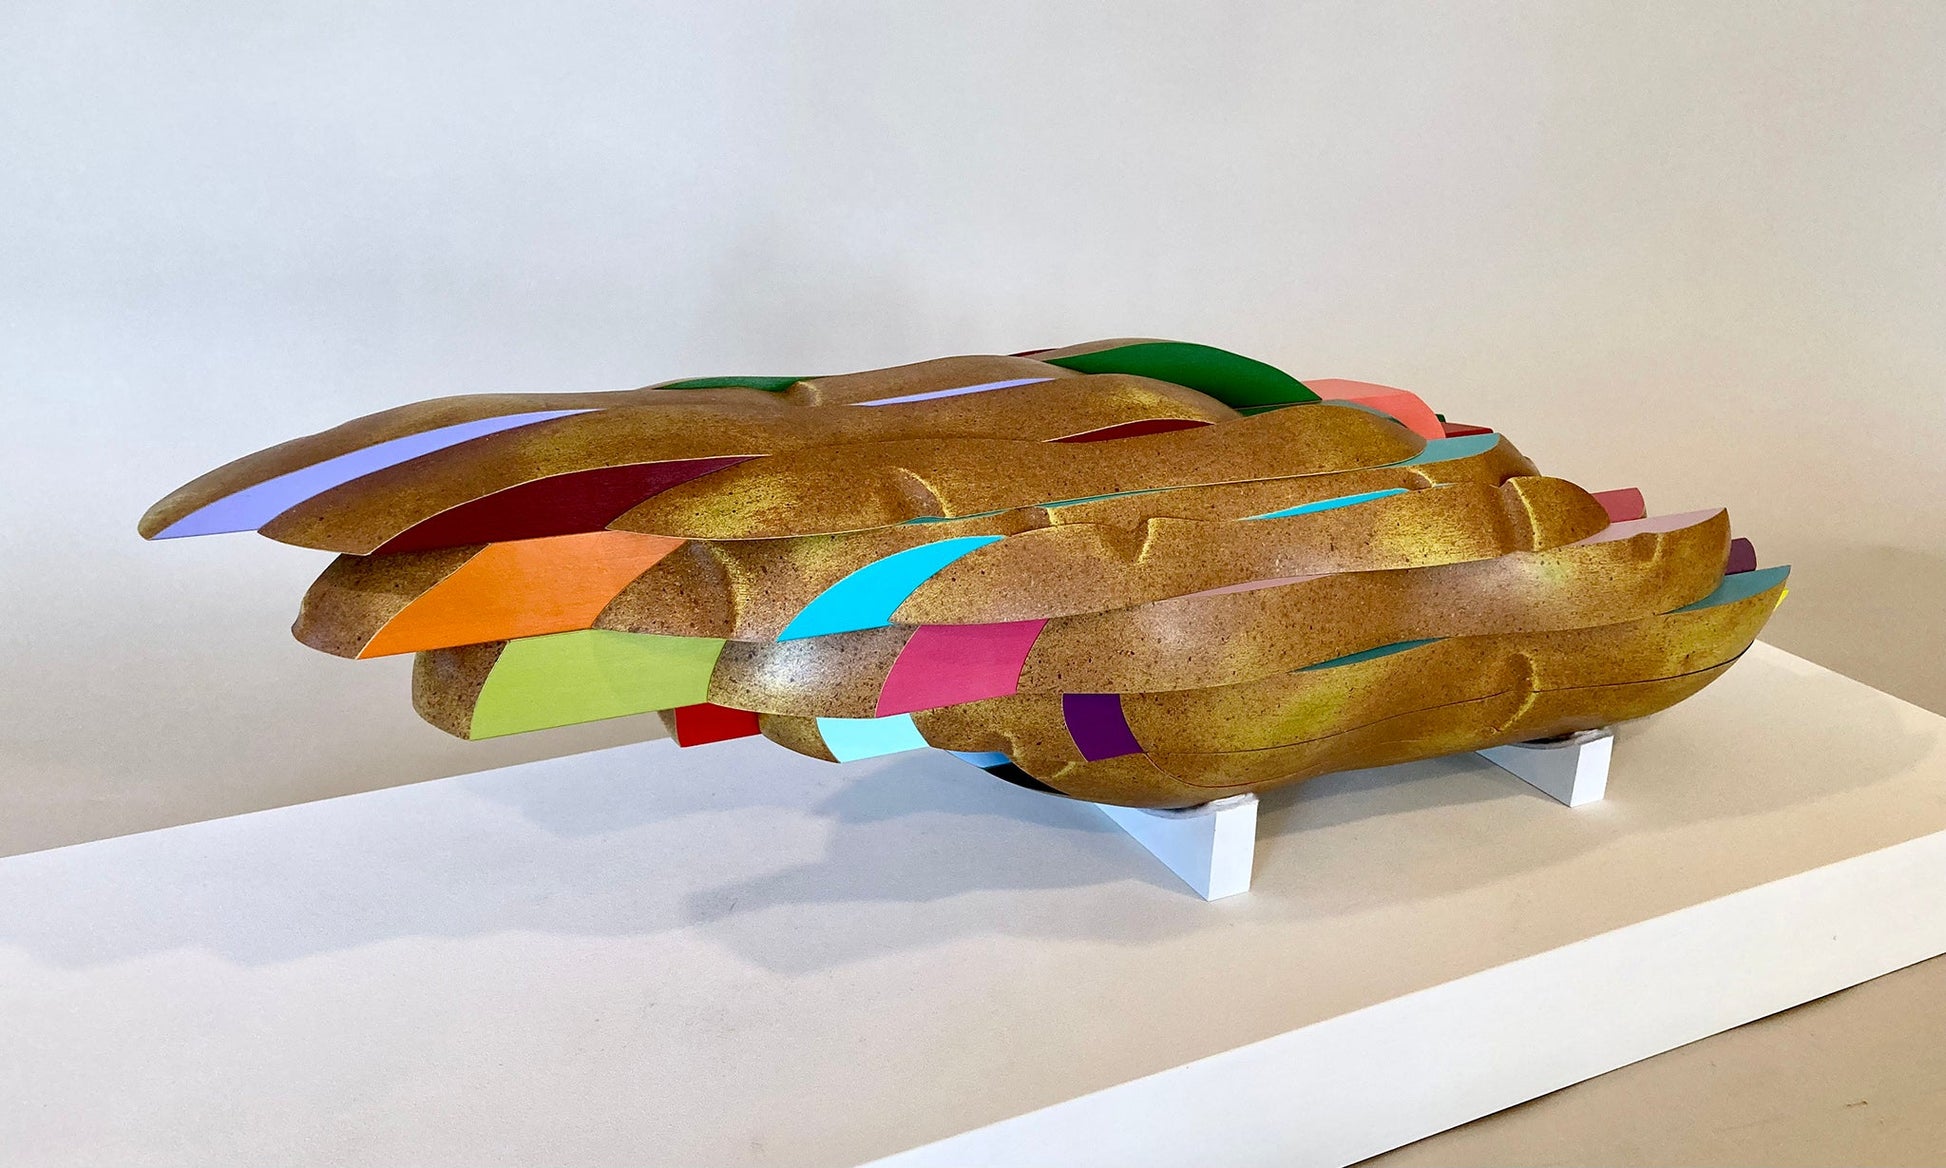 Wooden sculpture of a potato cut into fry shapes. Where all of the shapes are separate from the potato there are different colors orange, red, purple, blue, and pink.2019 6.5"x15"x7" painted wood Sean O'Meallie